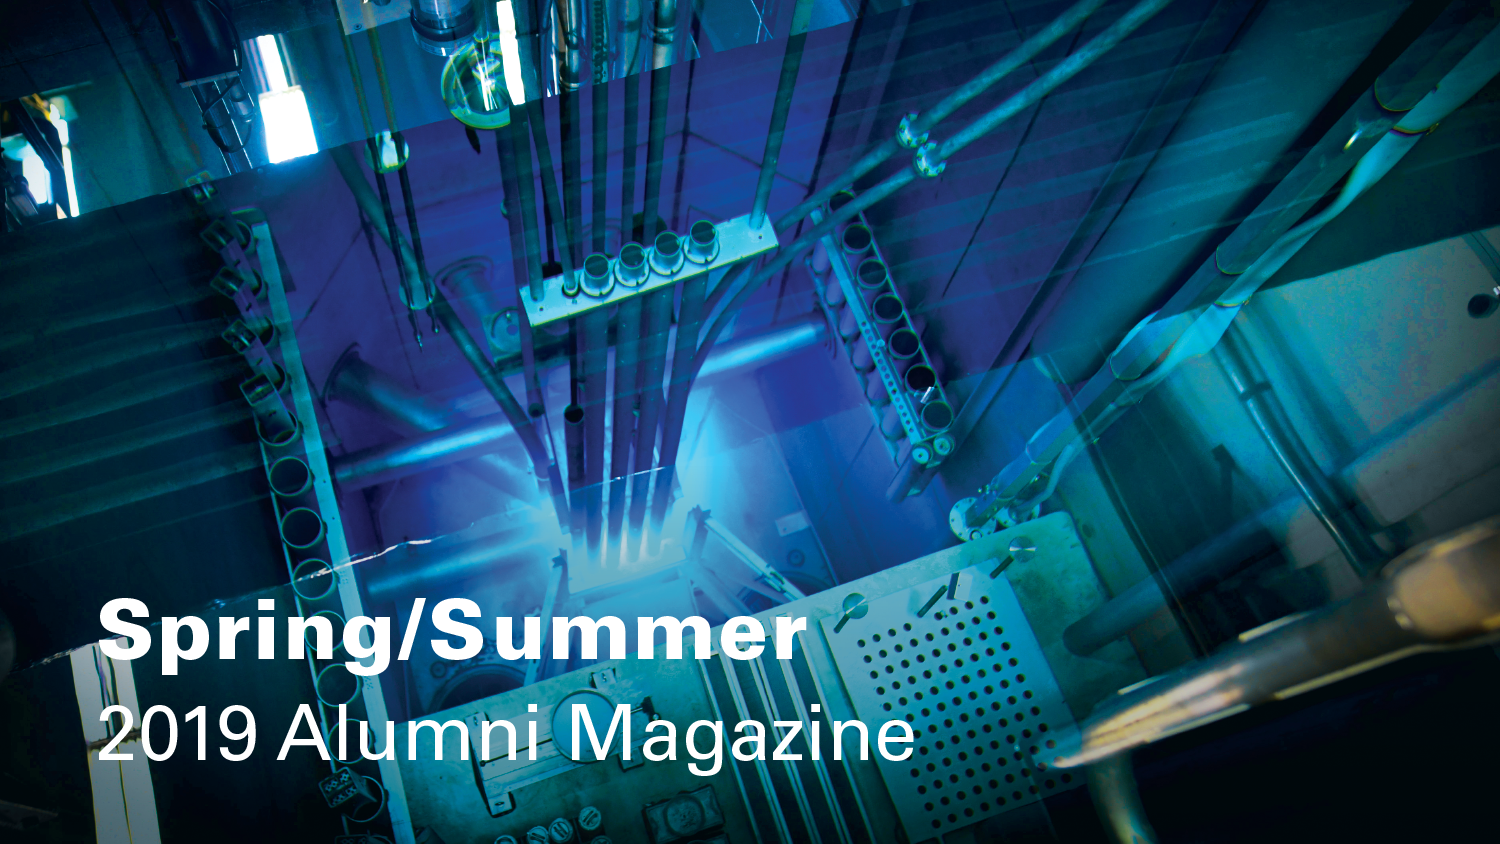 Cover image of nuclear reactor for the COE's Spring/Summer 2019 Alumni Magazine